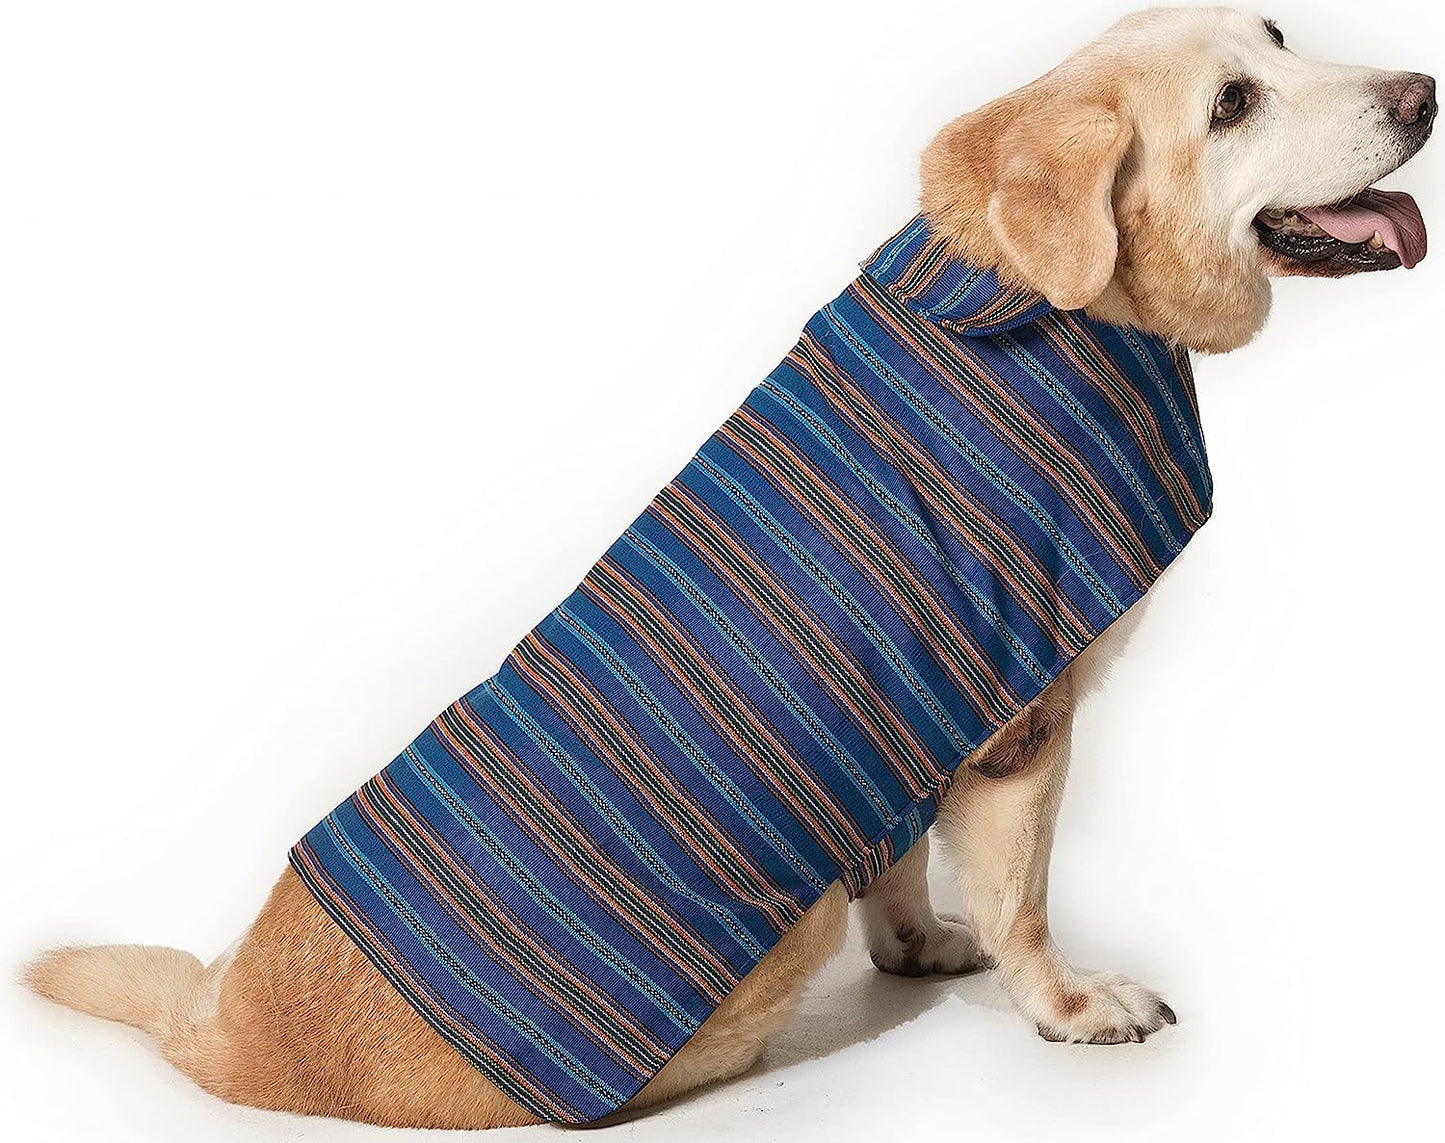 Mayan Dog Clothing for Dogs. Works As, Coat, Sweater, Vest, Jacket, Stress Reliever. for XXS, Small, Medium, Large, XL, XXL Dogs (Any Size) Animals & Pet Supplies > Pet Supplies > Dog Supplies > Dog Apparel Mayan Dog Pink X-Small 